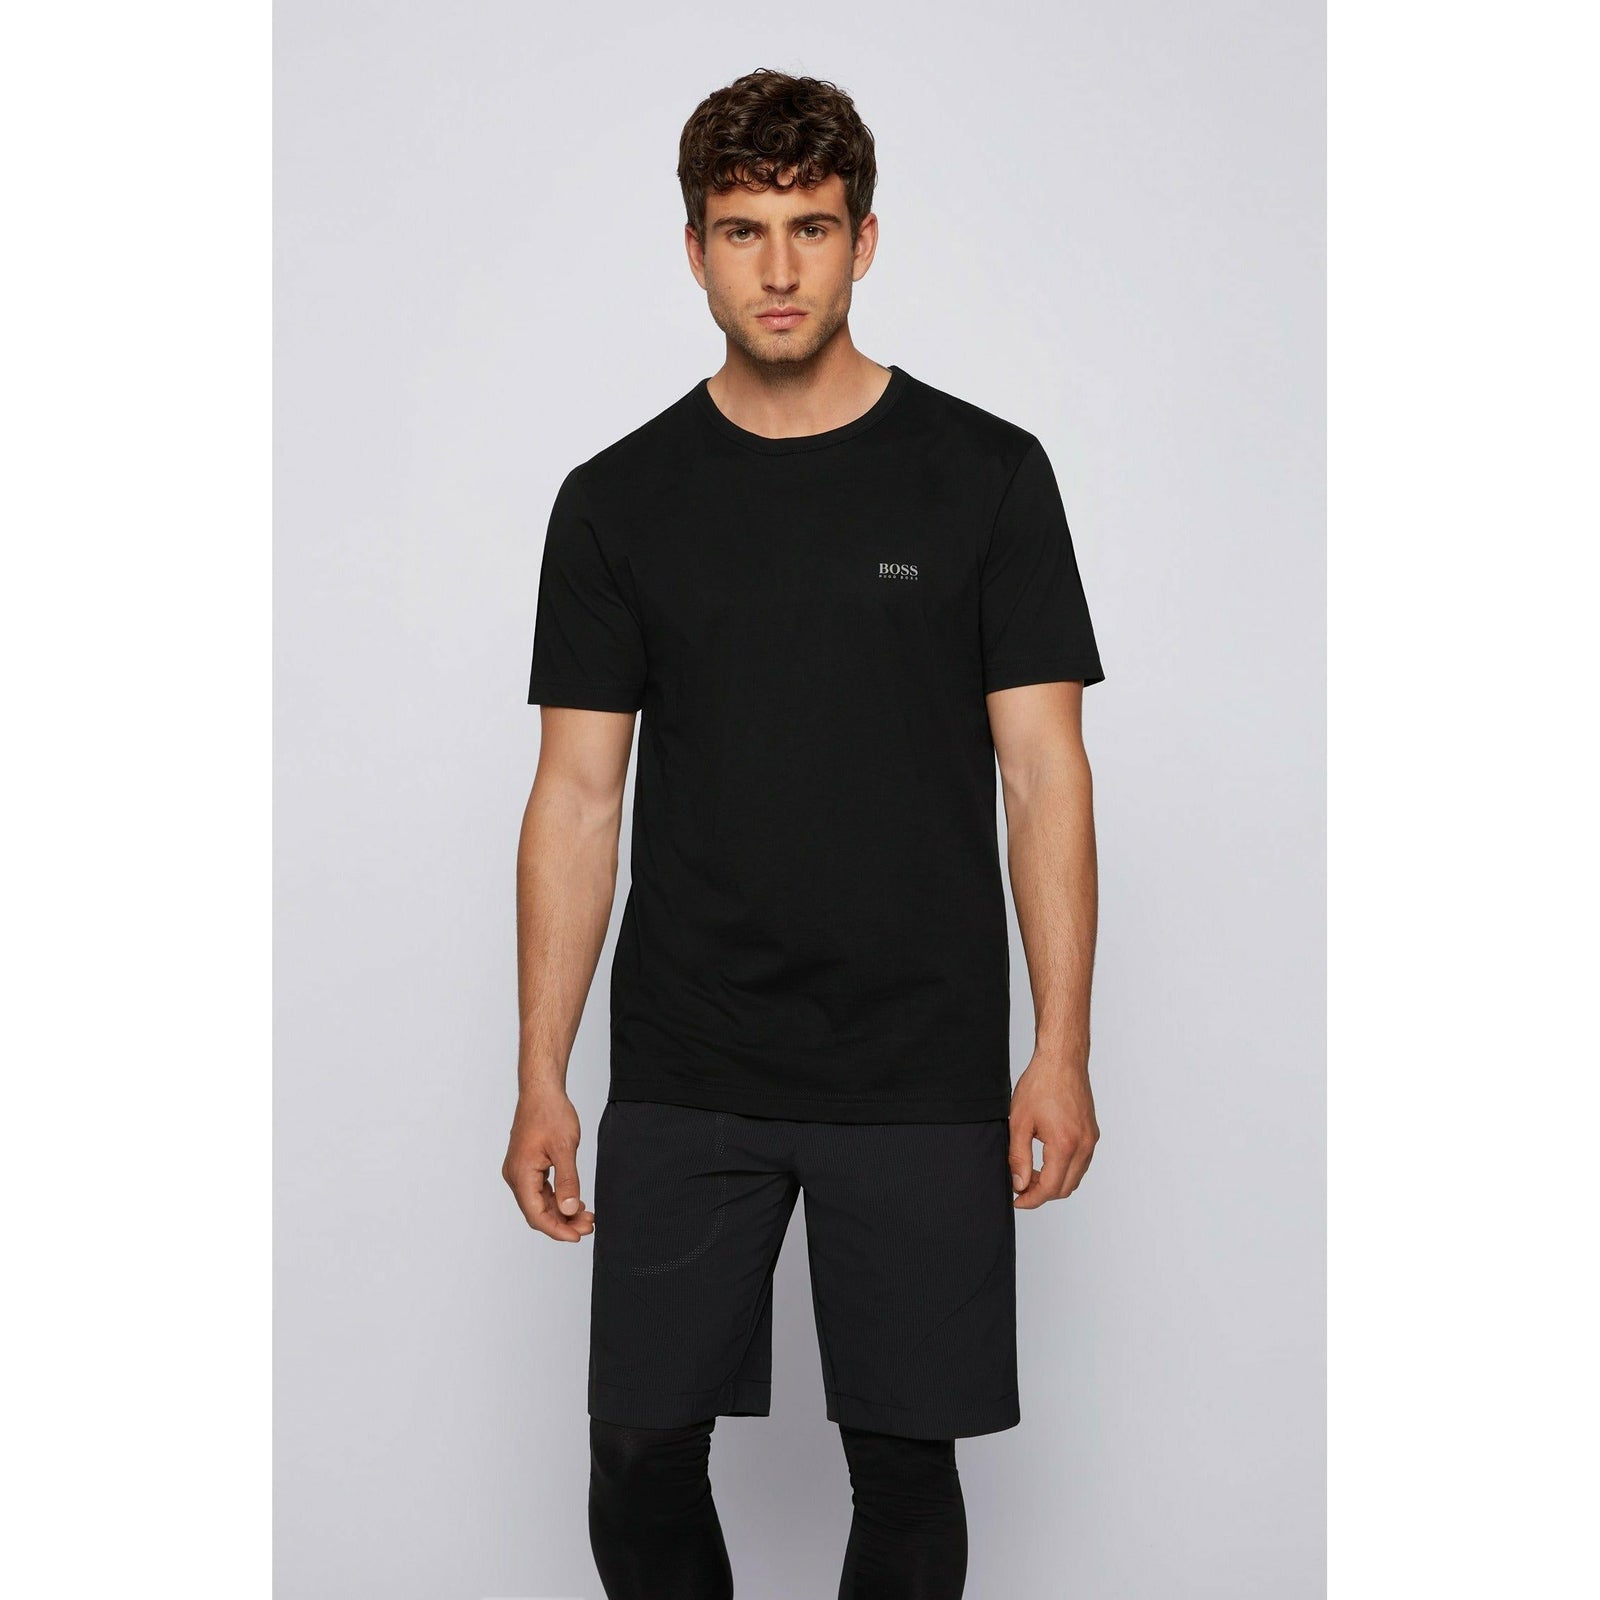 REGULAR-FIT T-SHIRT WITH CONTRAST DETAIL - Yooto